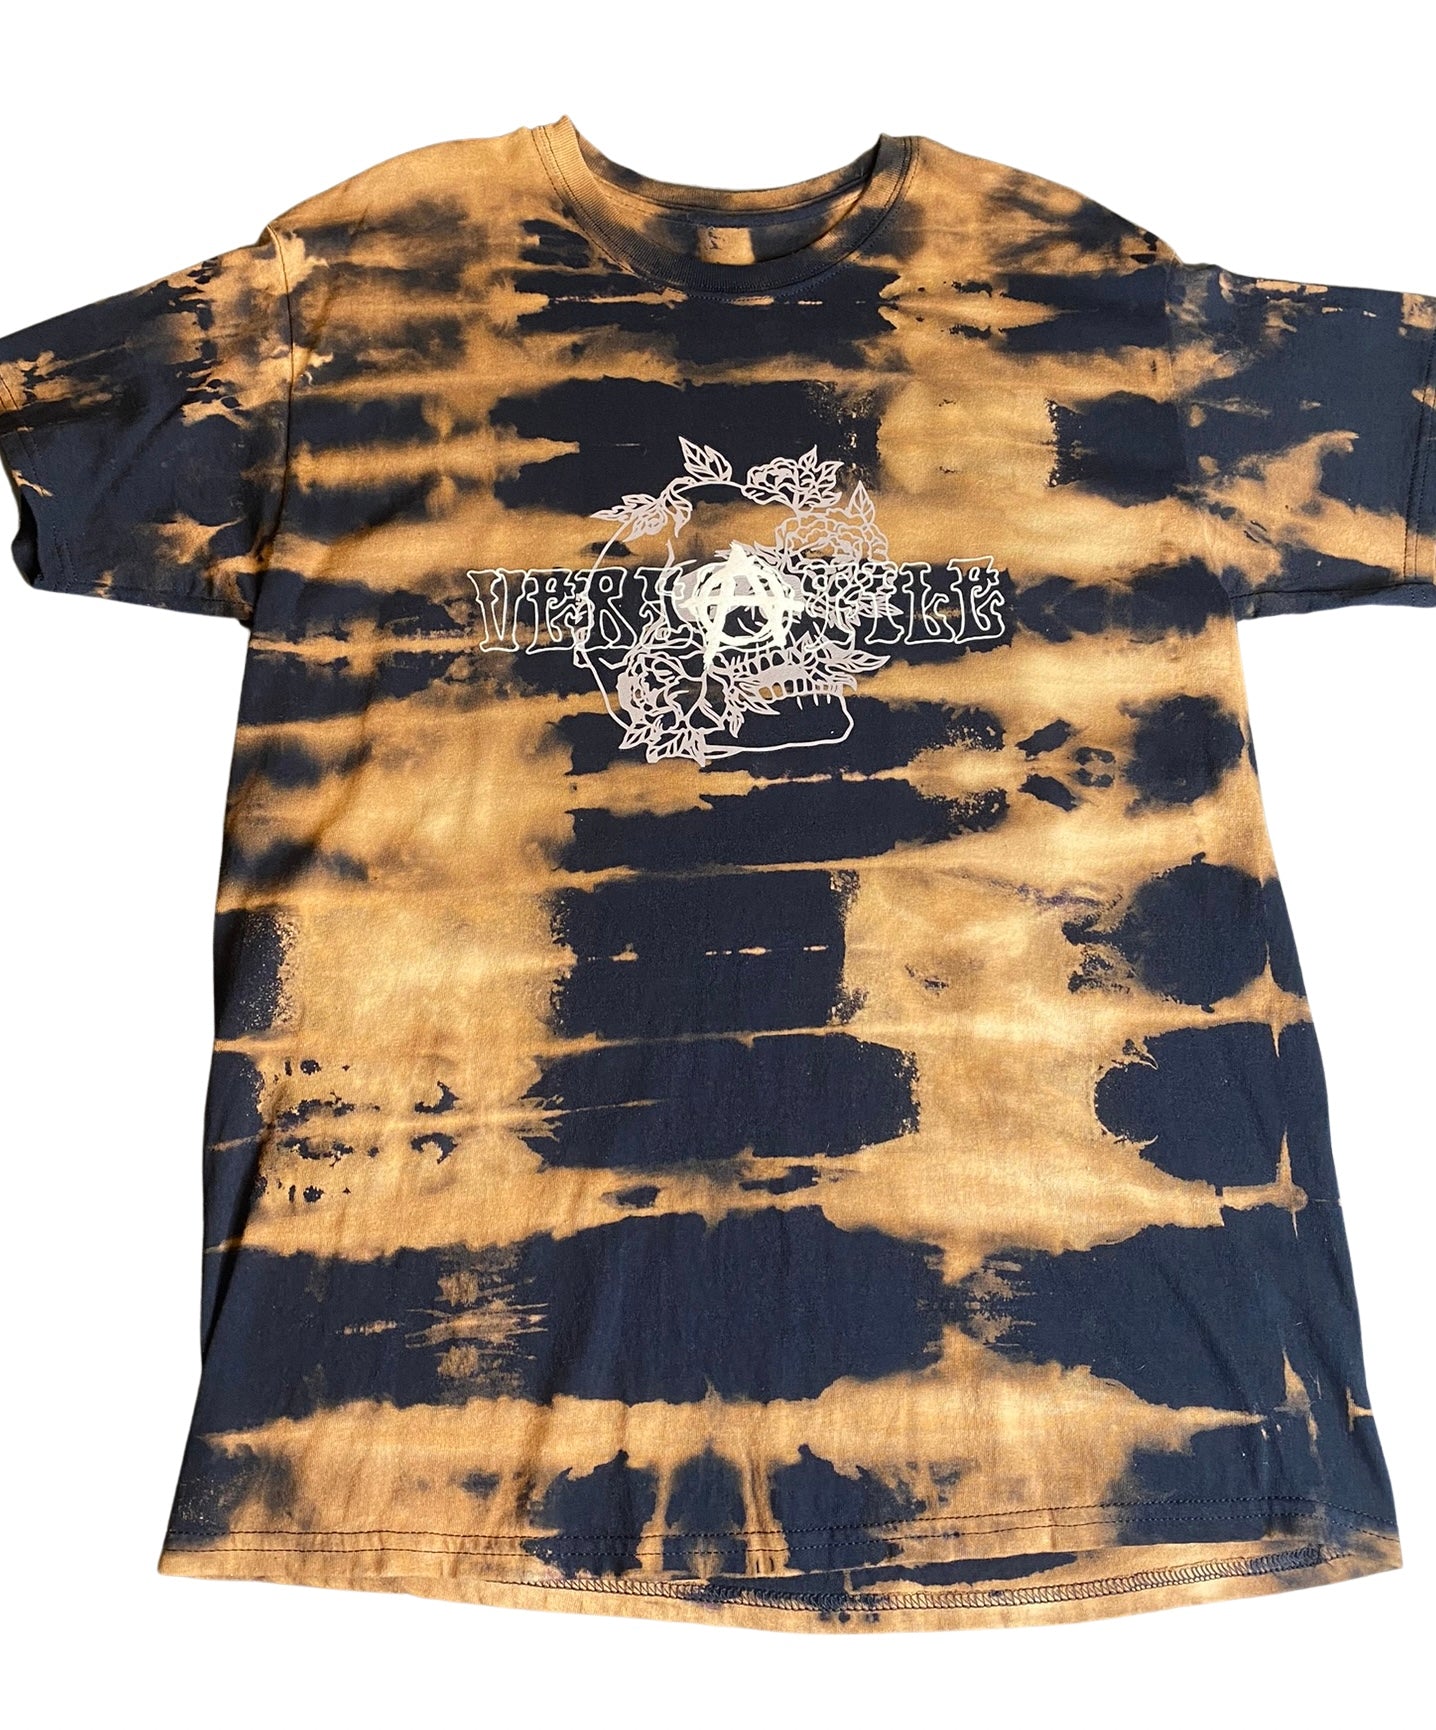 “Great Divide” Dyed T-Shirt